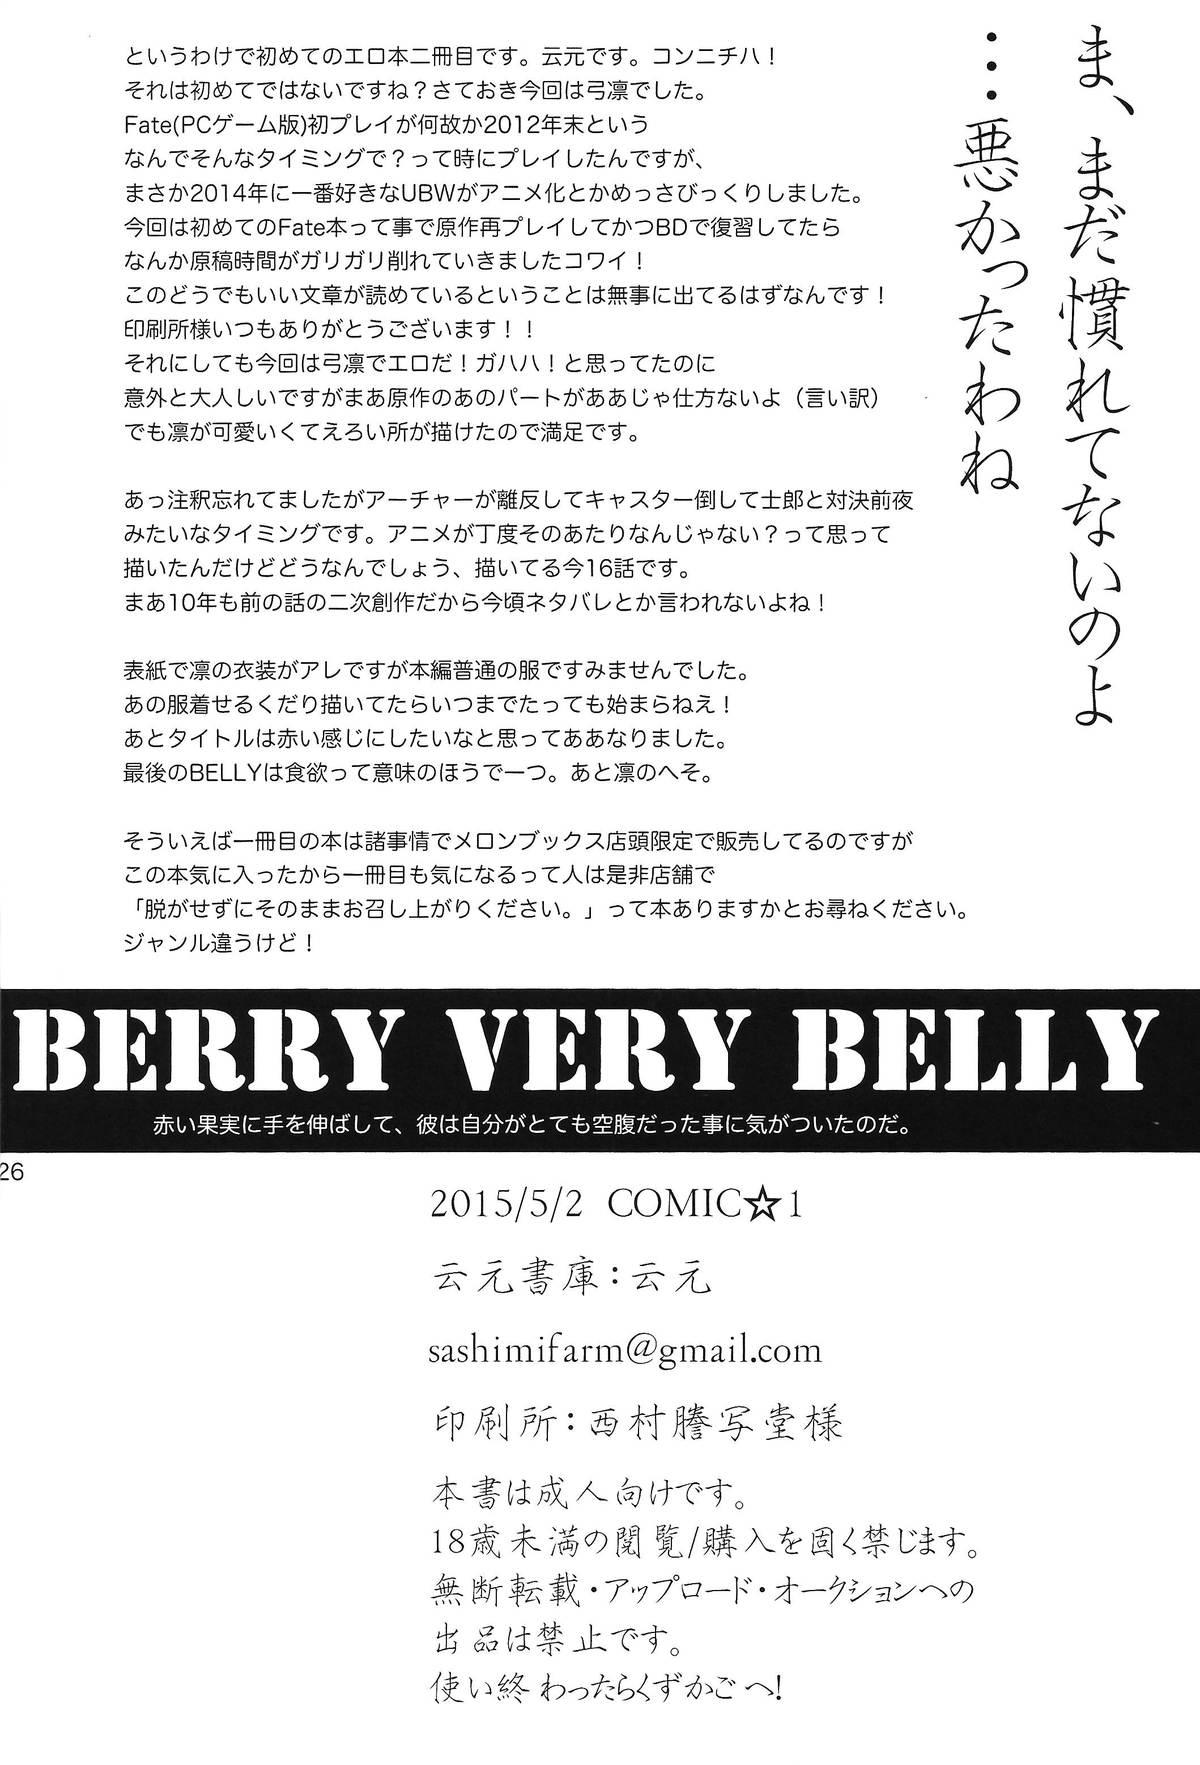 Amateur BERRY VERY BELLY - Fate stay night Squirt - Page 24